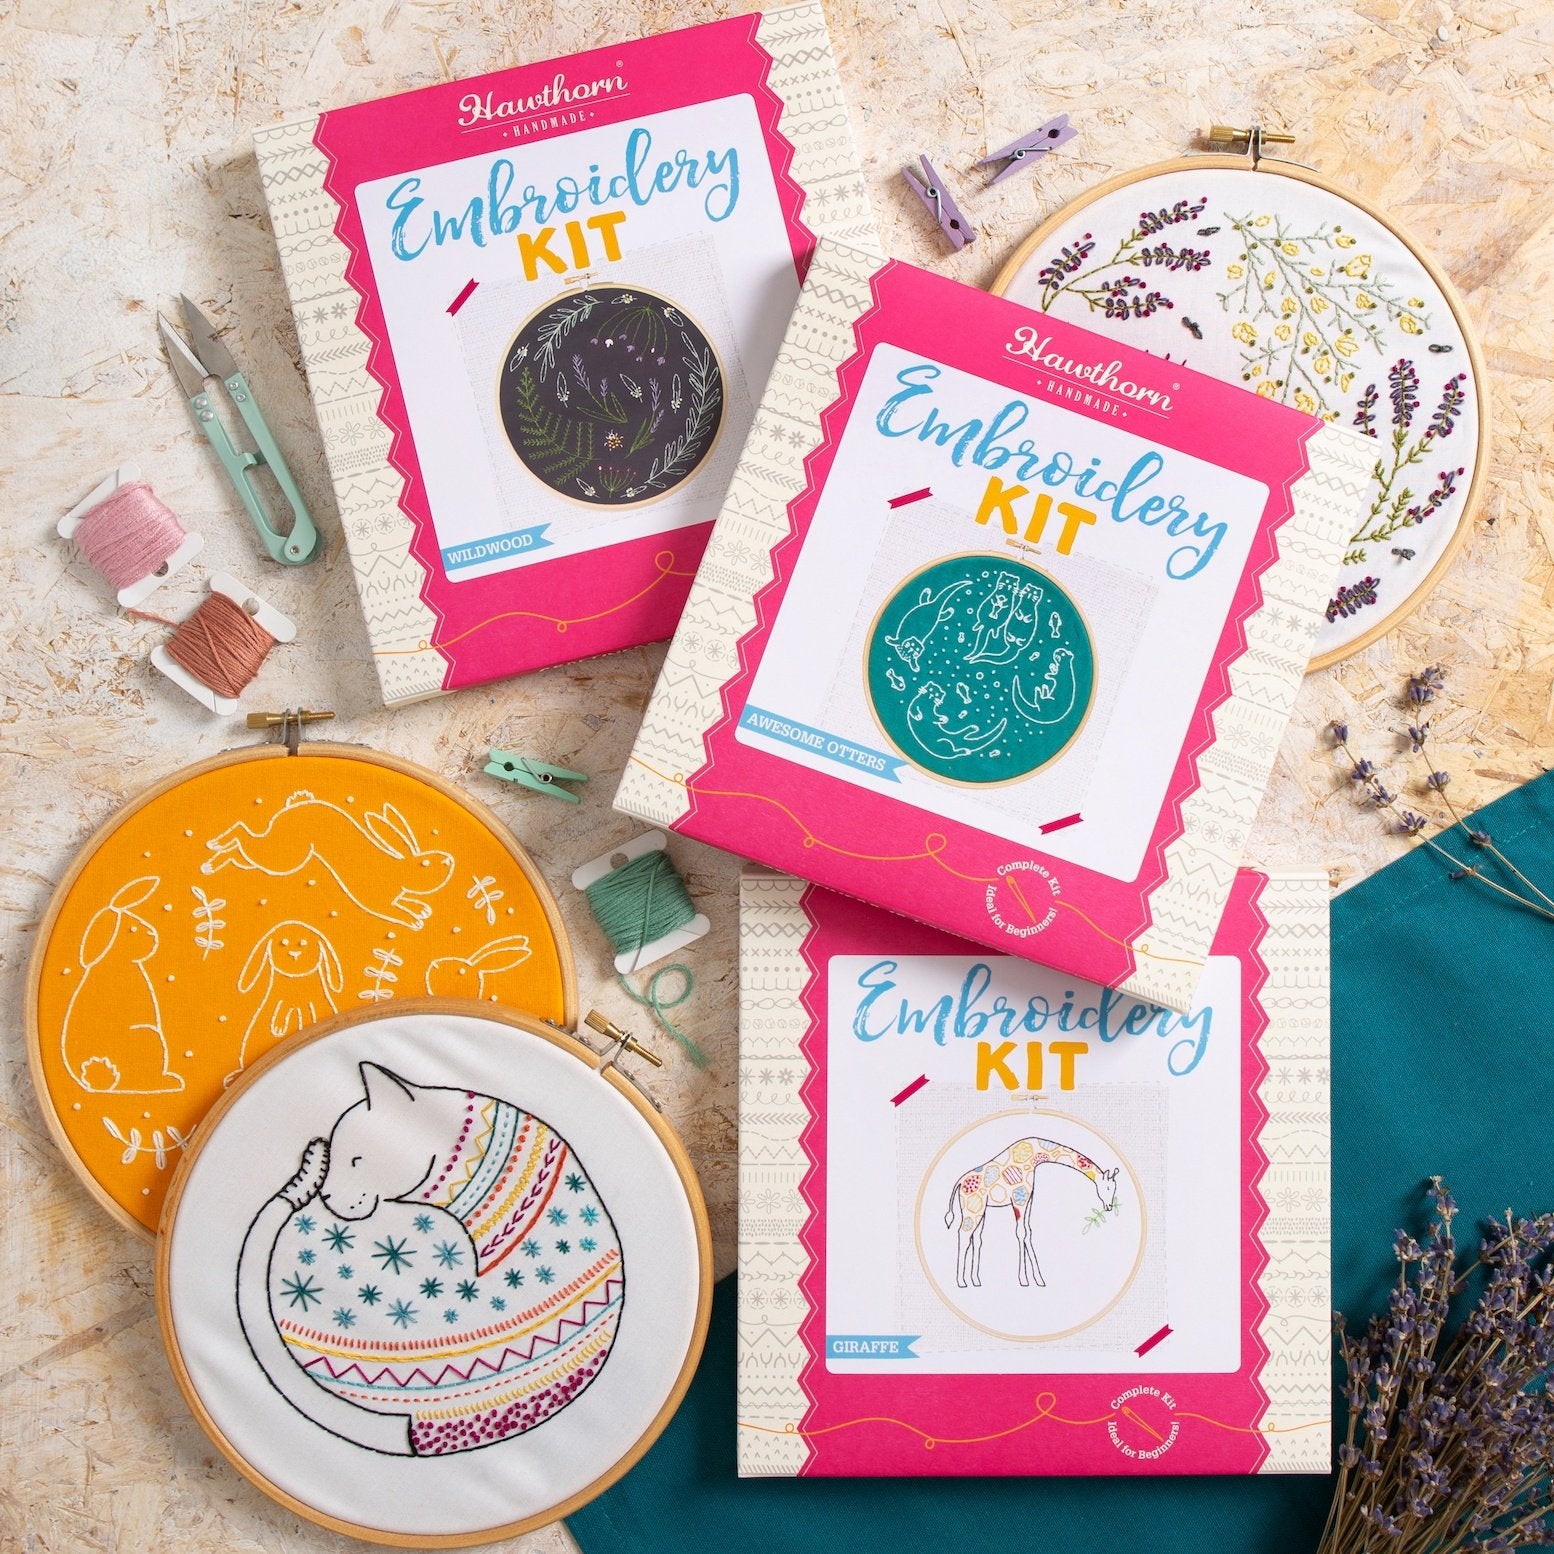 Three embroidery kits in their boxes and three finished embroidery designs in their hoops displayed on a wooden backdrop.